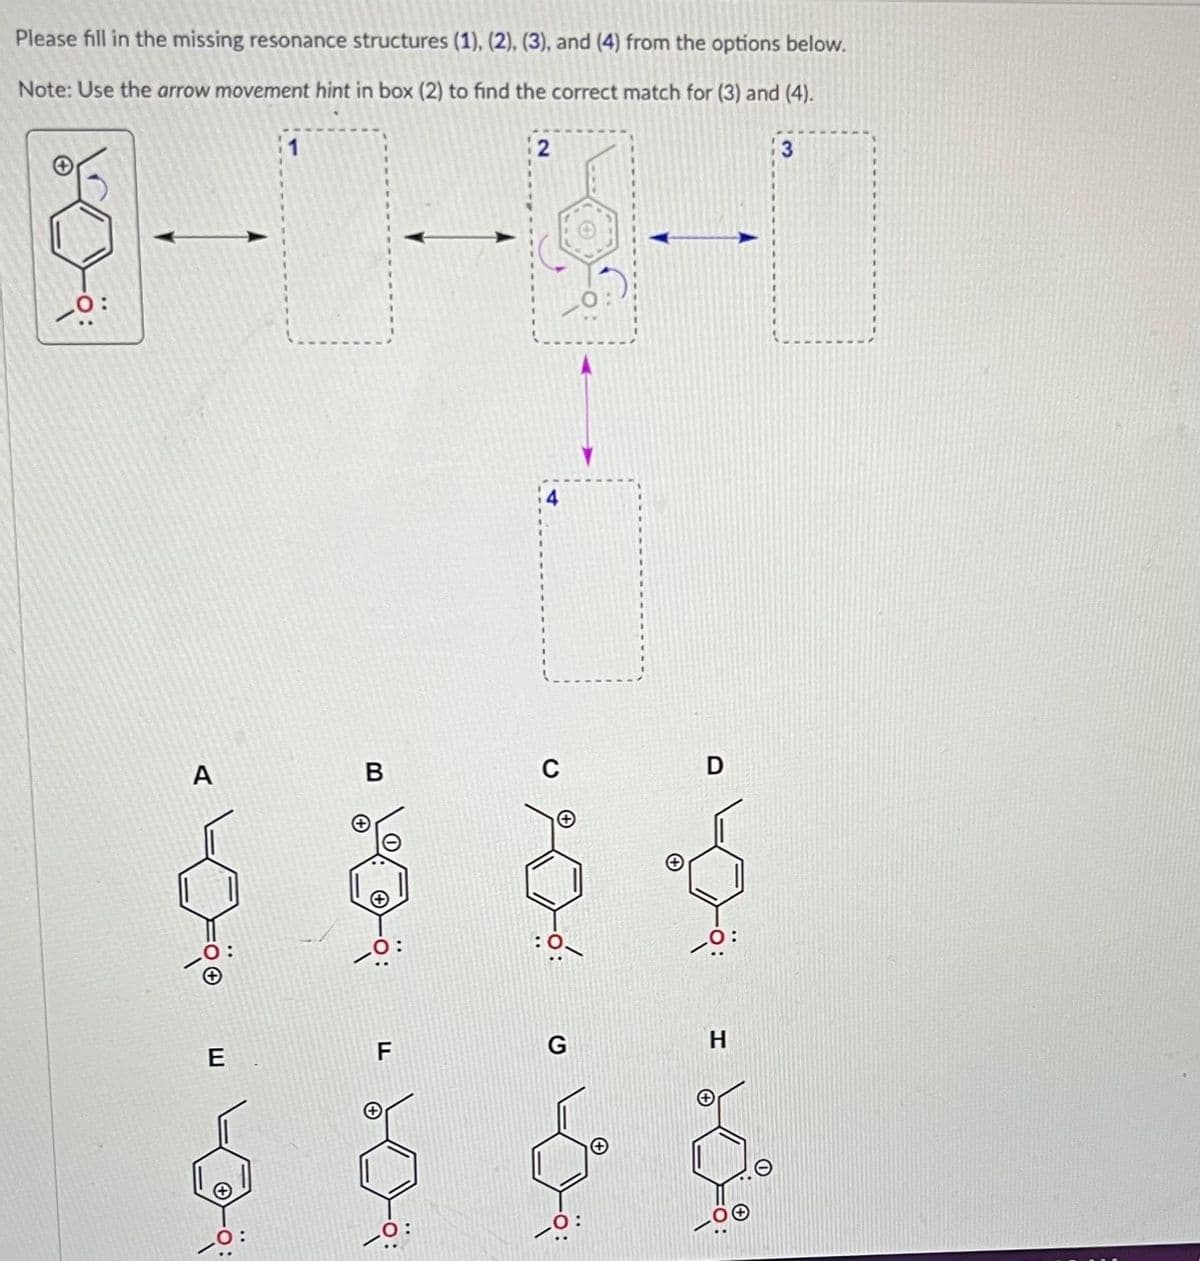 Please fill in the missing resonance structures (1), (2), (3), and (4) from the options below.
Note: Use the arrow movement hint in box (2) to find the correct match for (3) and (4).
:ܘܟ
A
E
B
F
2
G
0:
0:
H
-OⓇ
3